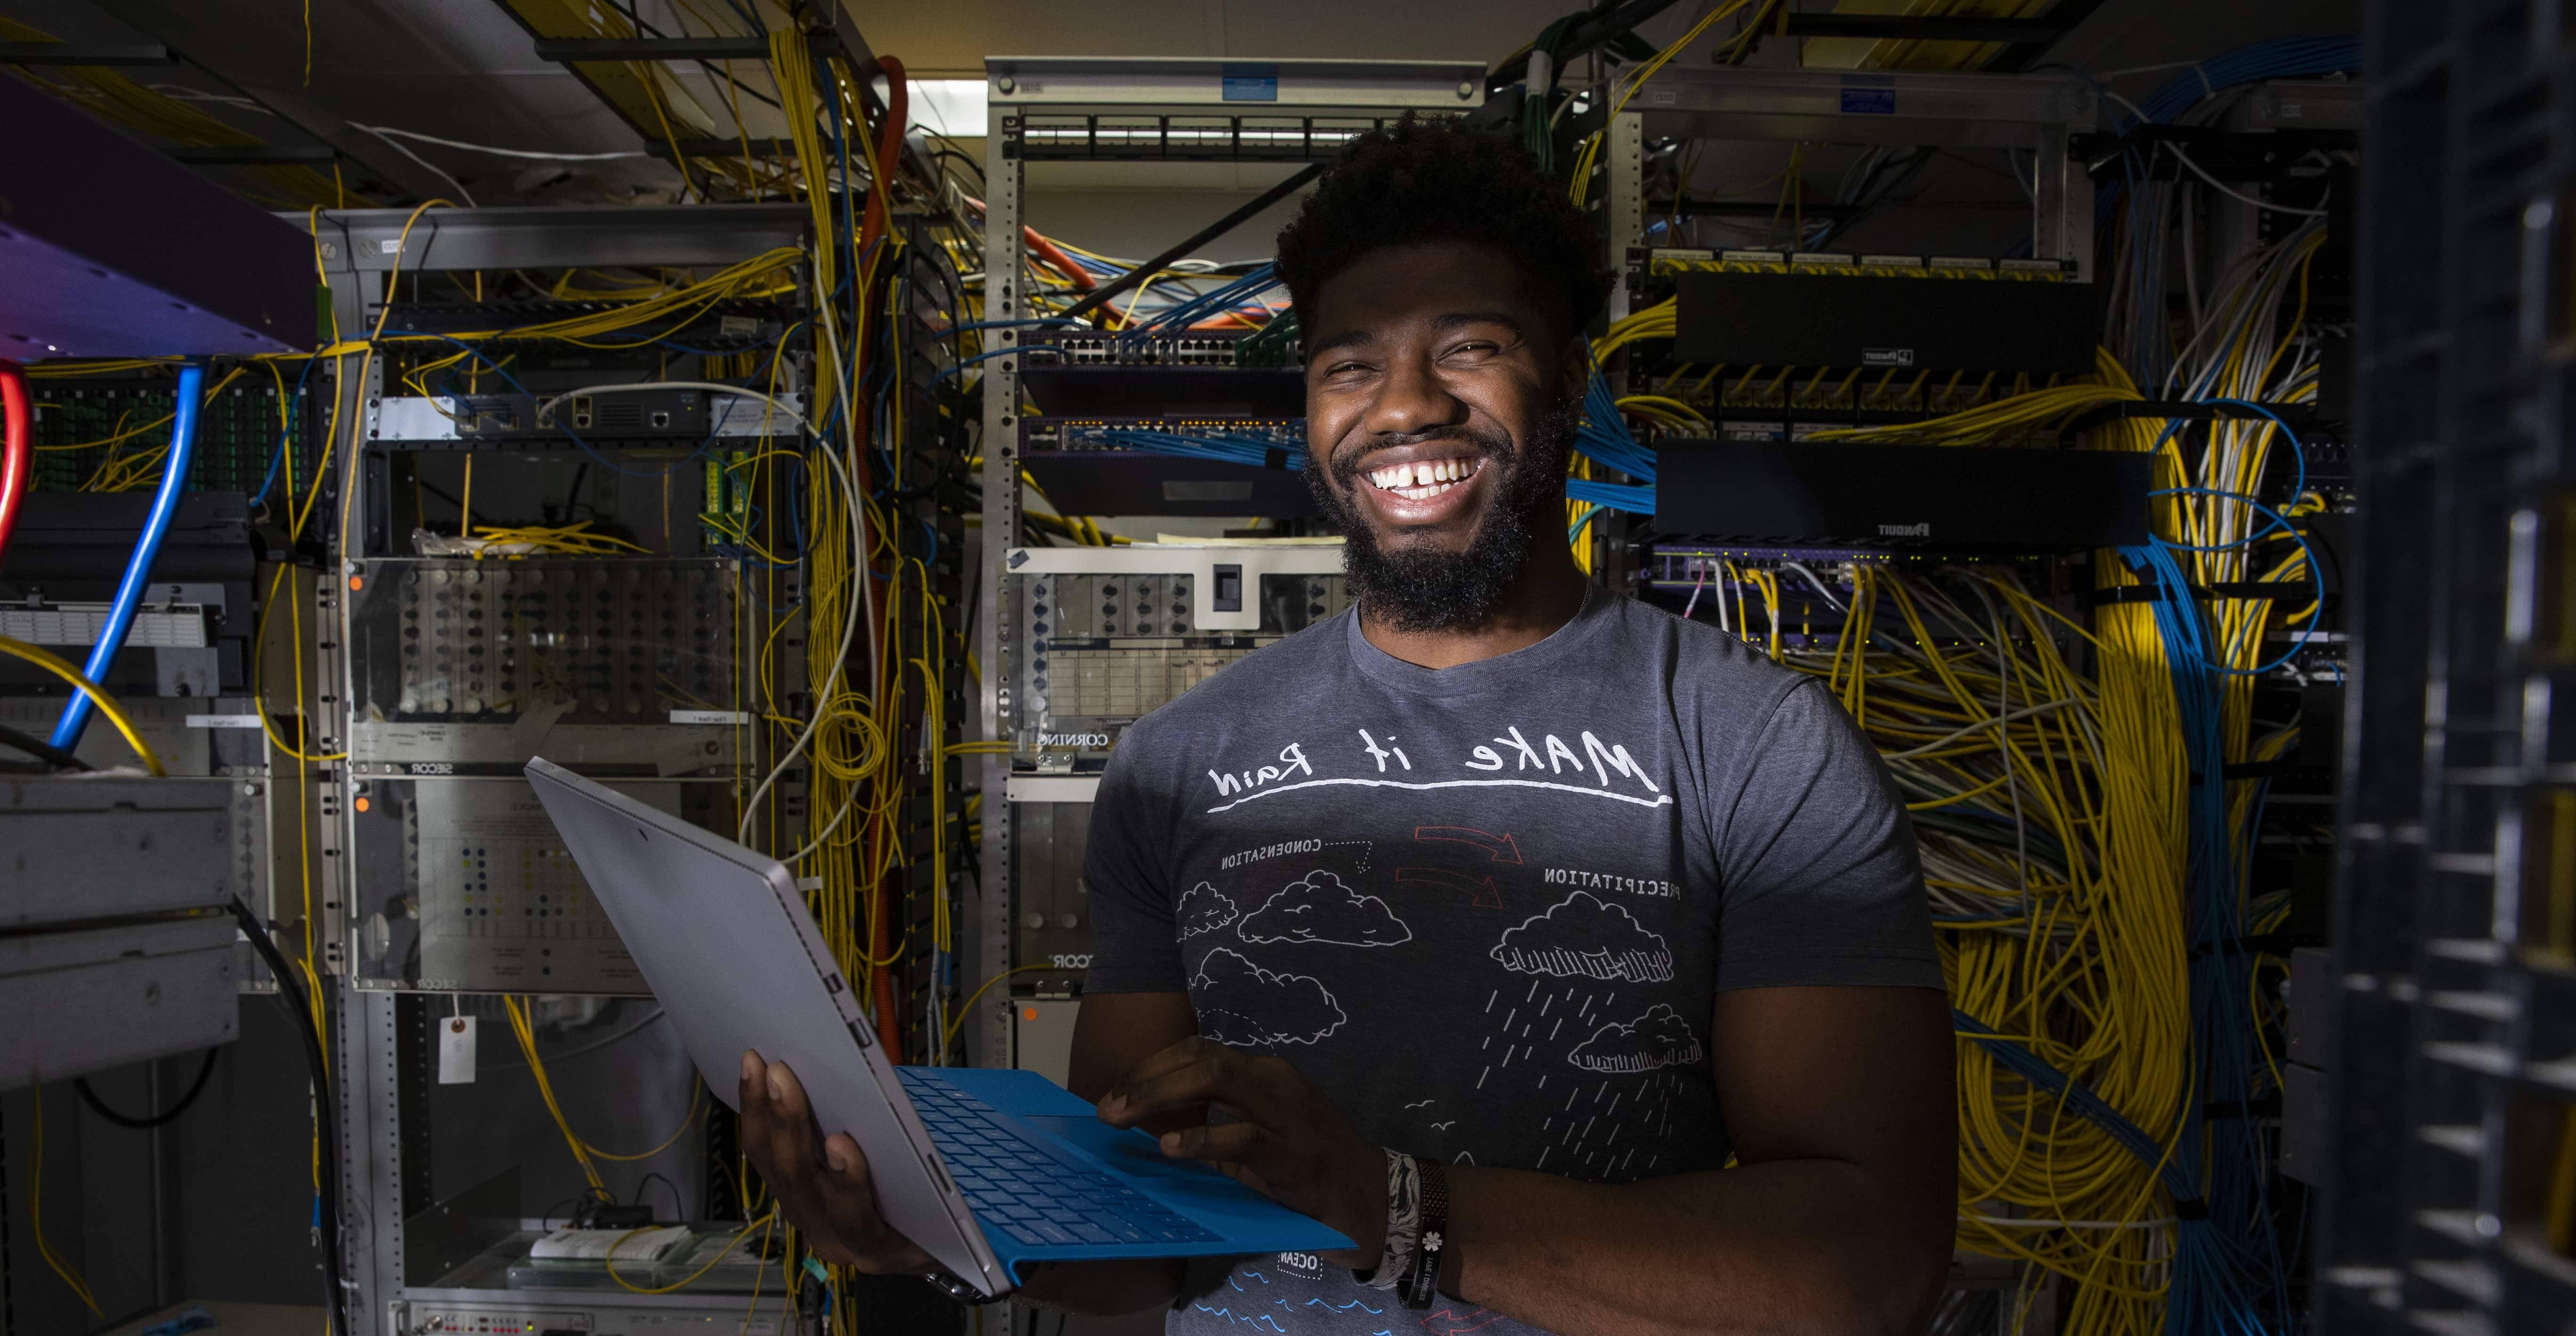 Student with laptop smiling in server room with cables all around.